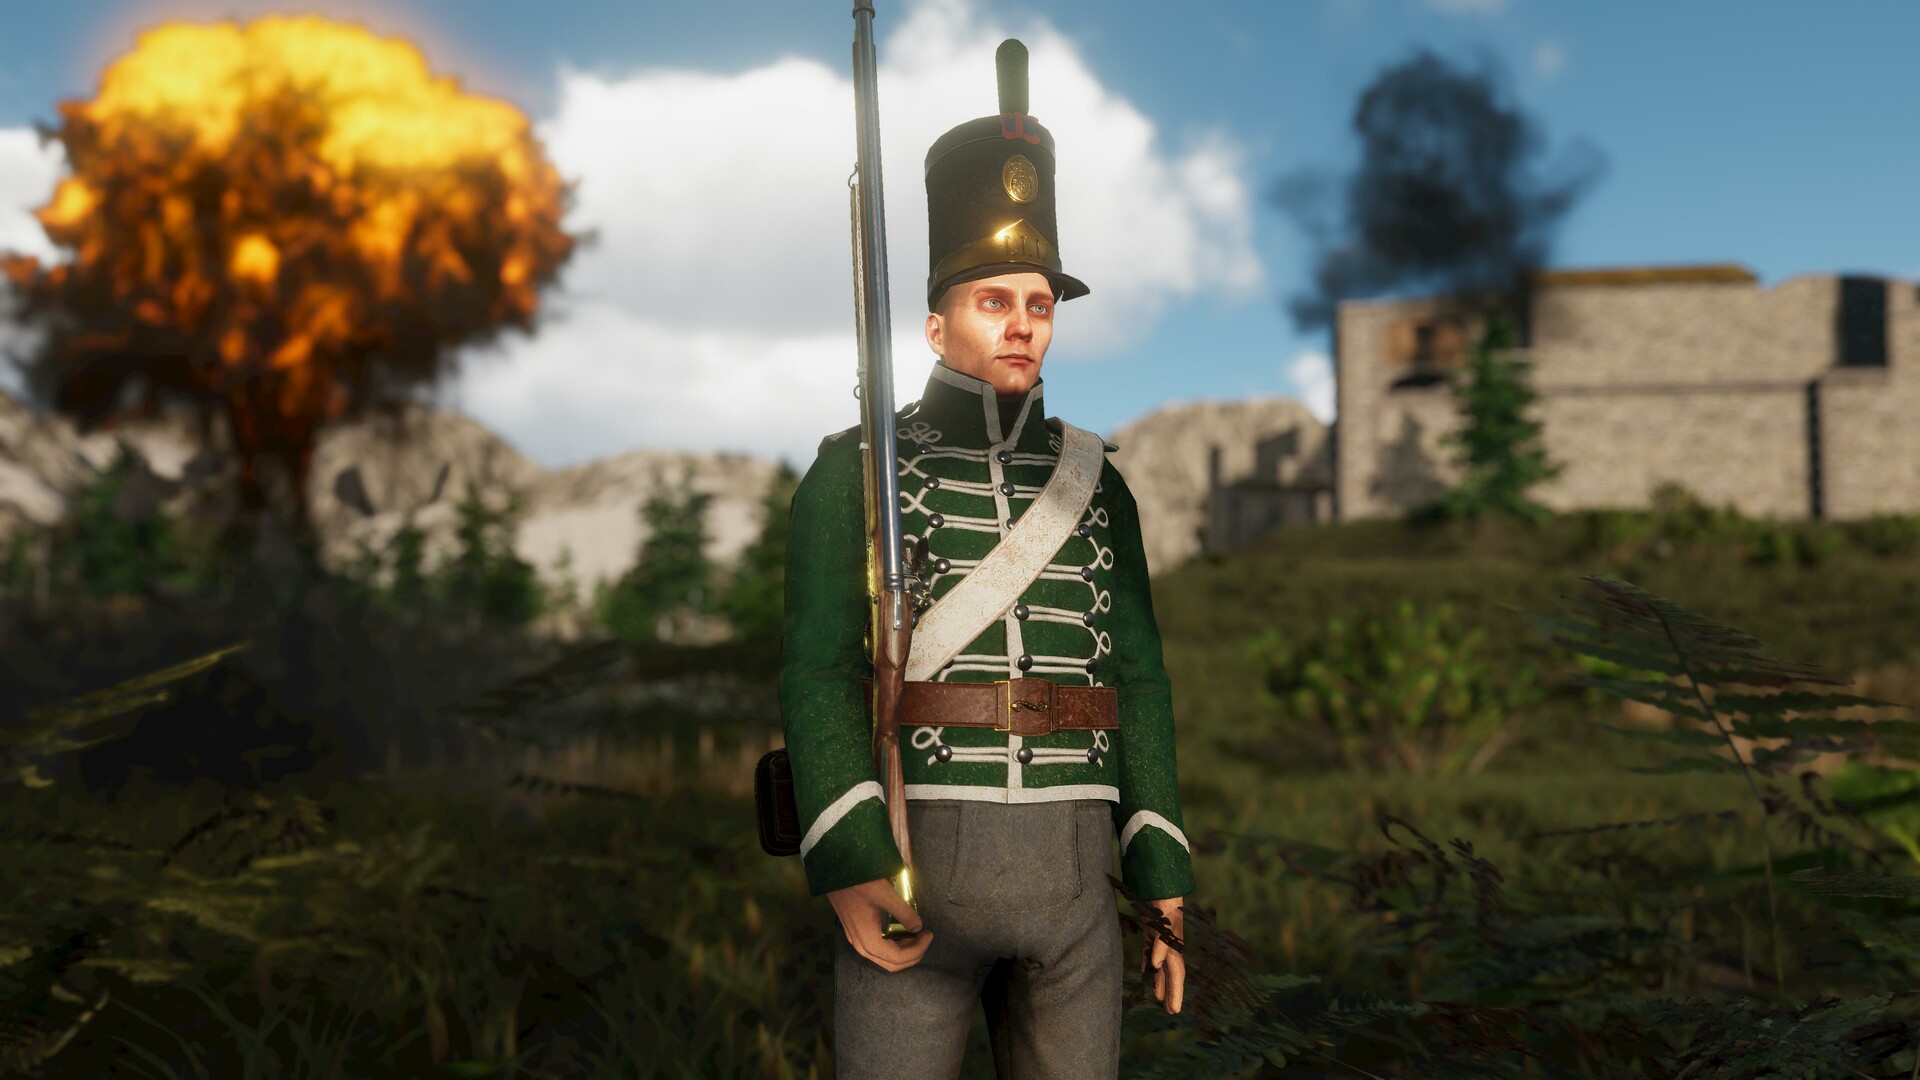 Holdfast: Nations At War on Steam